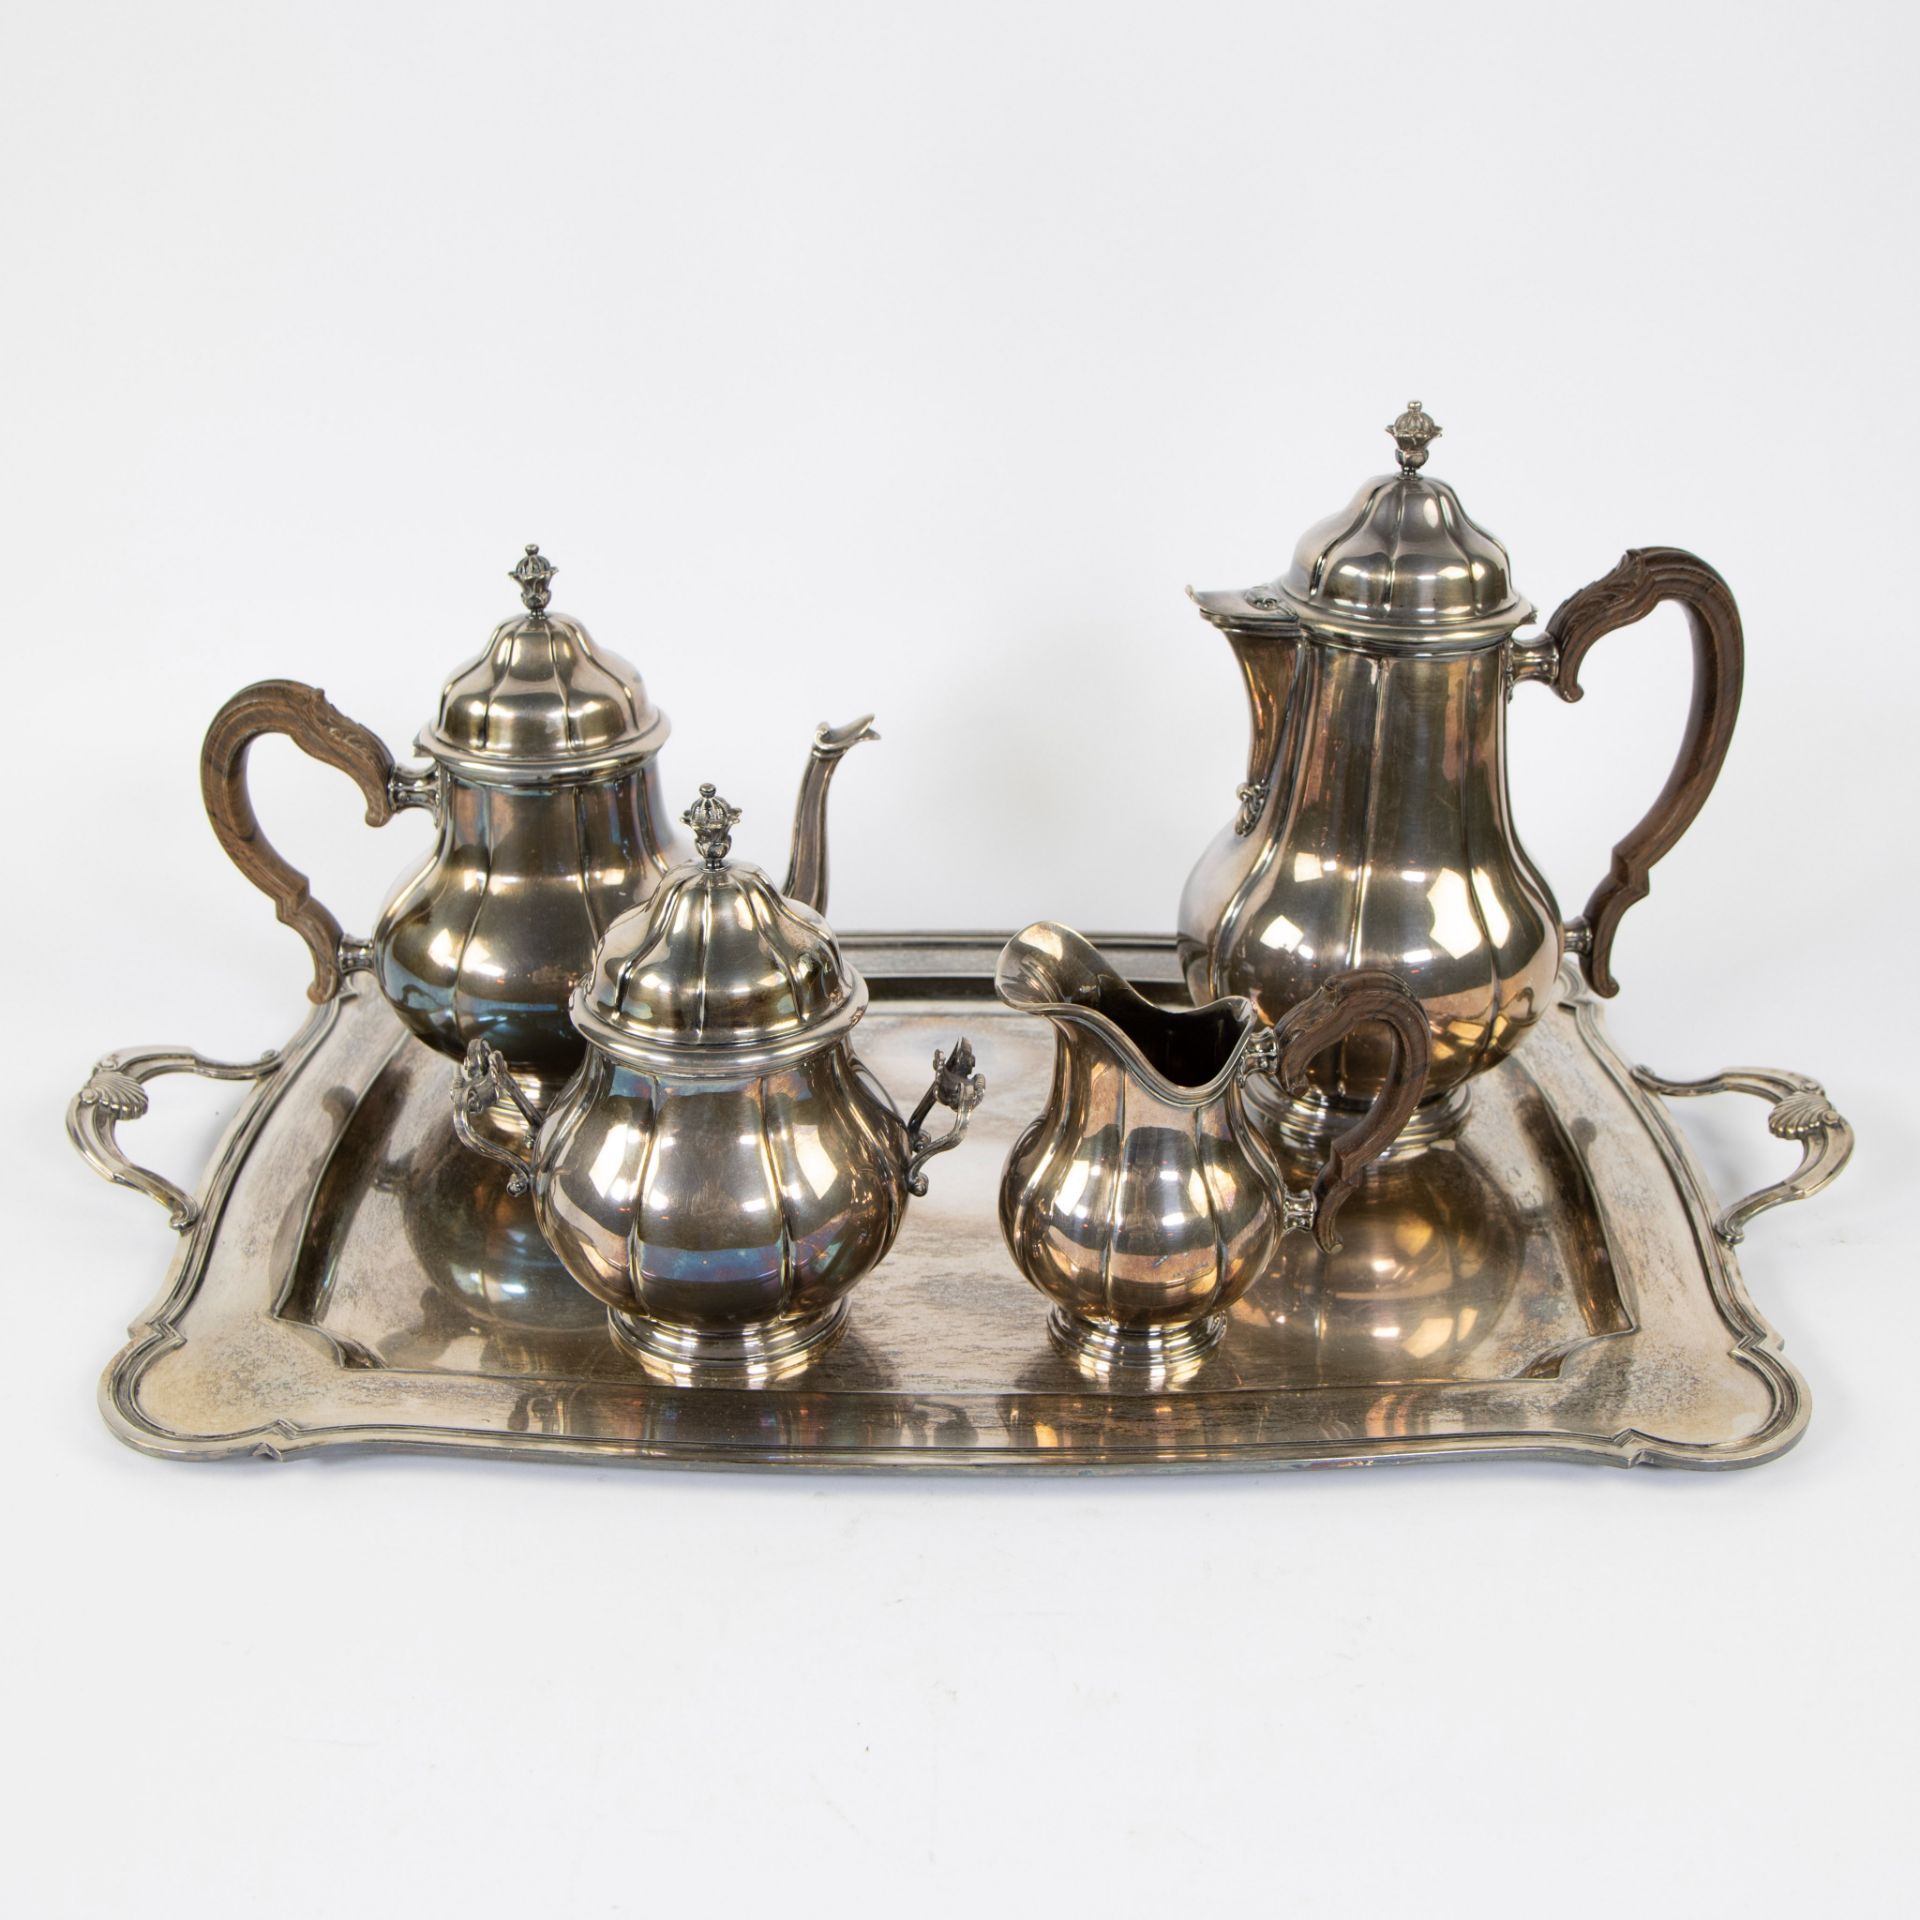 Silver coffee and tea service WOLFERS A800, marked